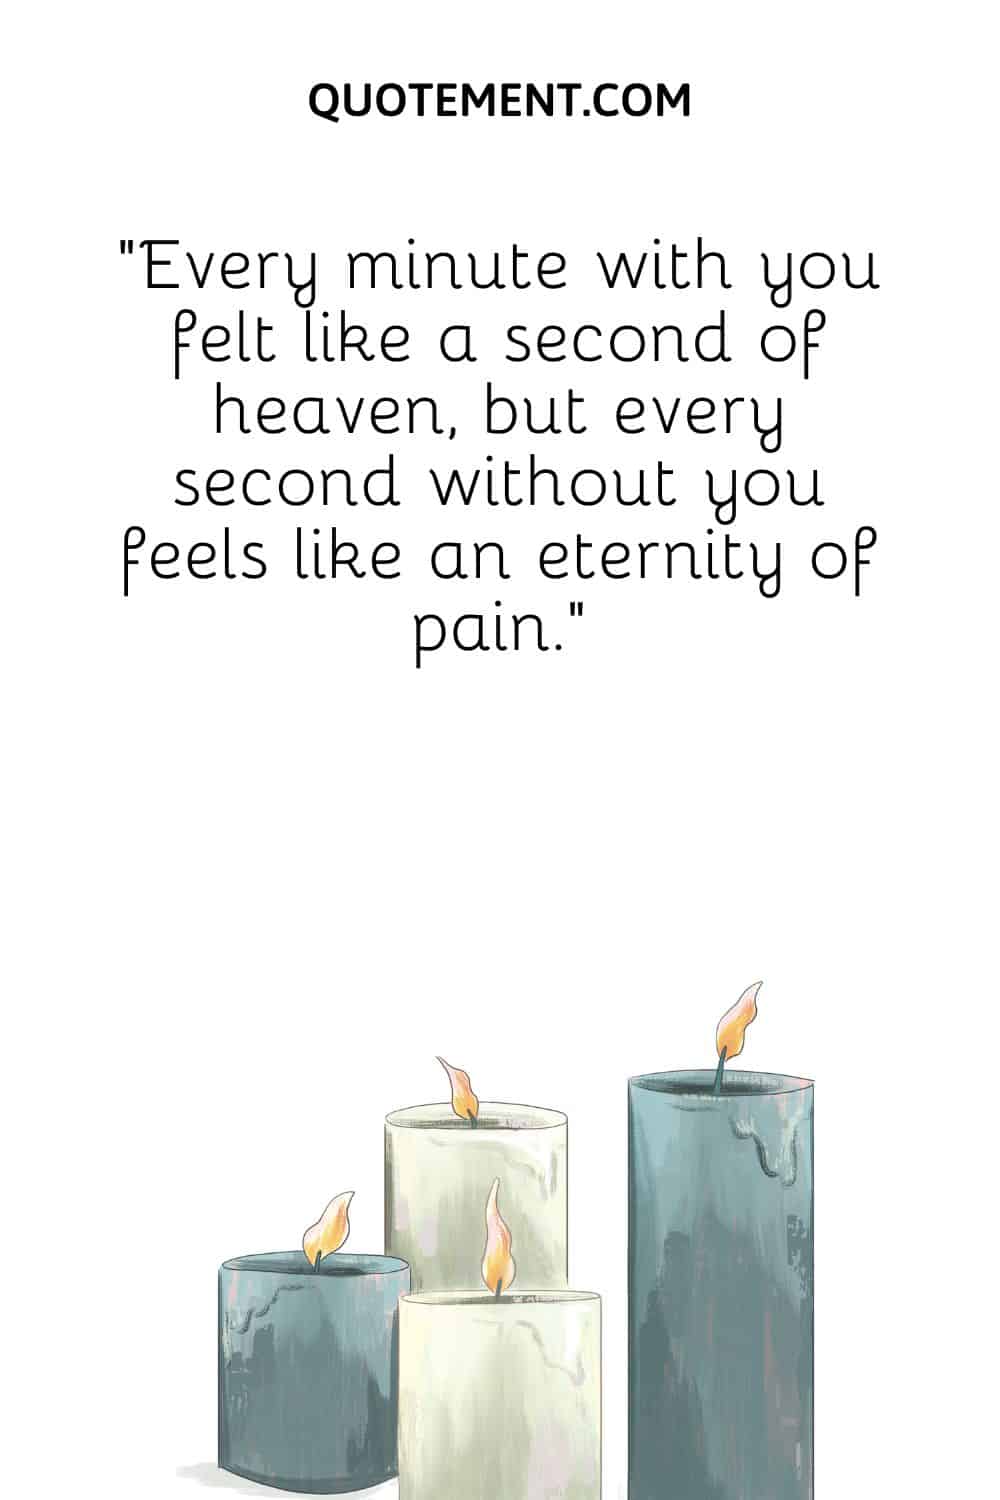 “Every minute with you felt like a second of heaven, but every second without you feels like an eternity of pain.”